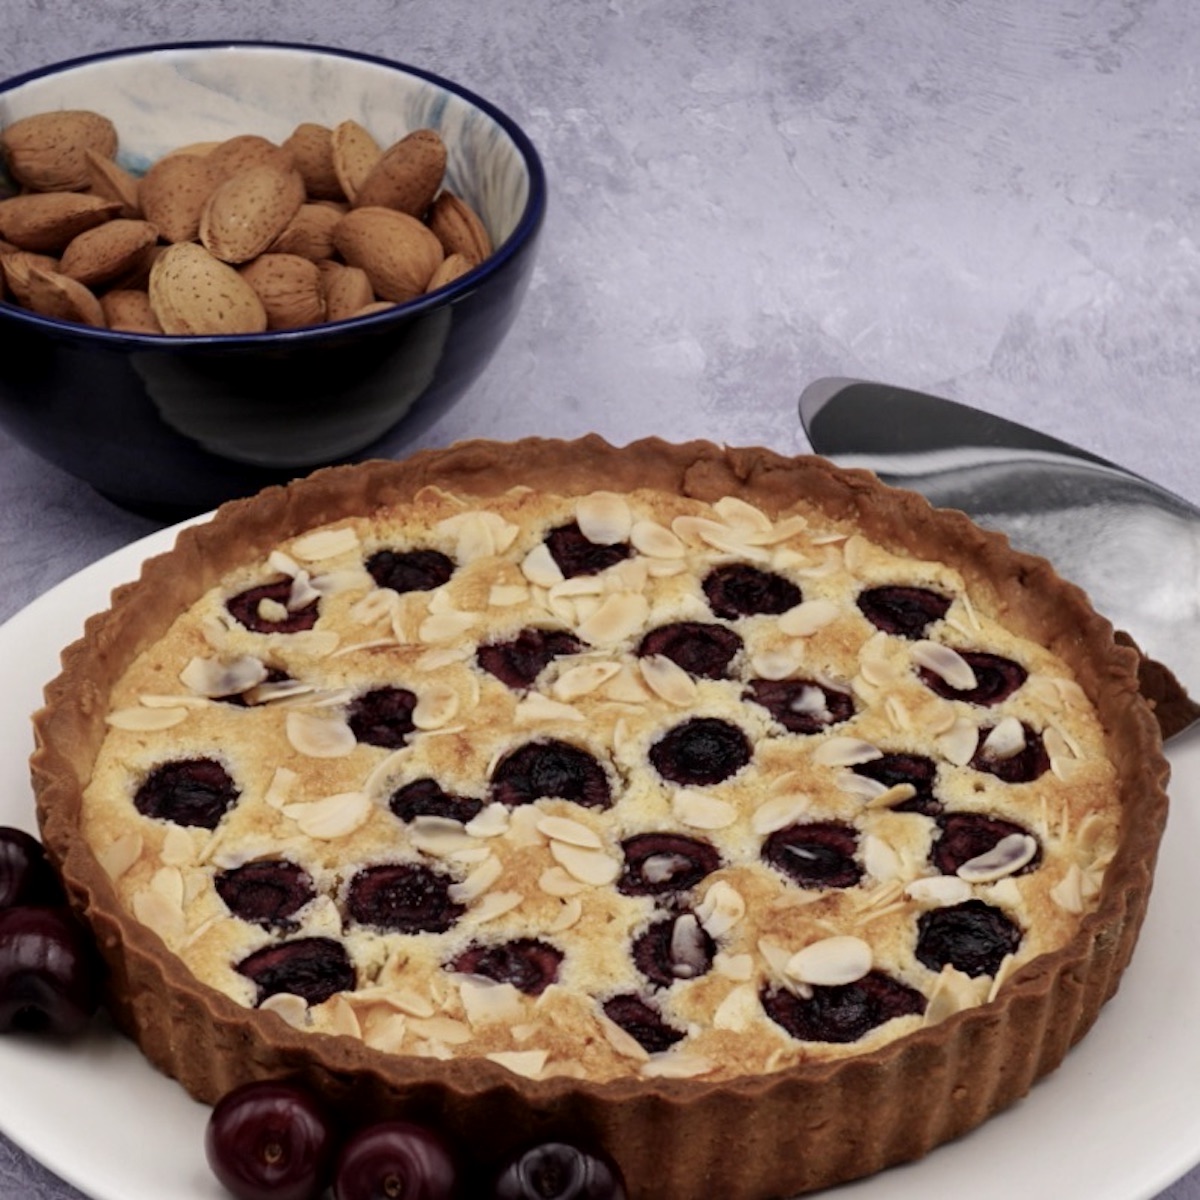 A Bakewell tart on a serving plate next to a bowl of almonds.